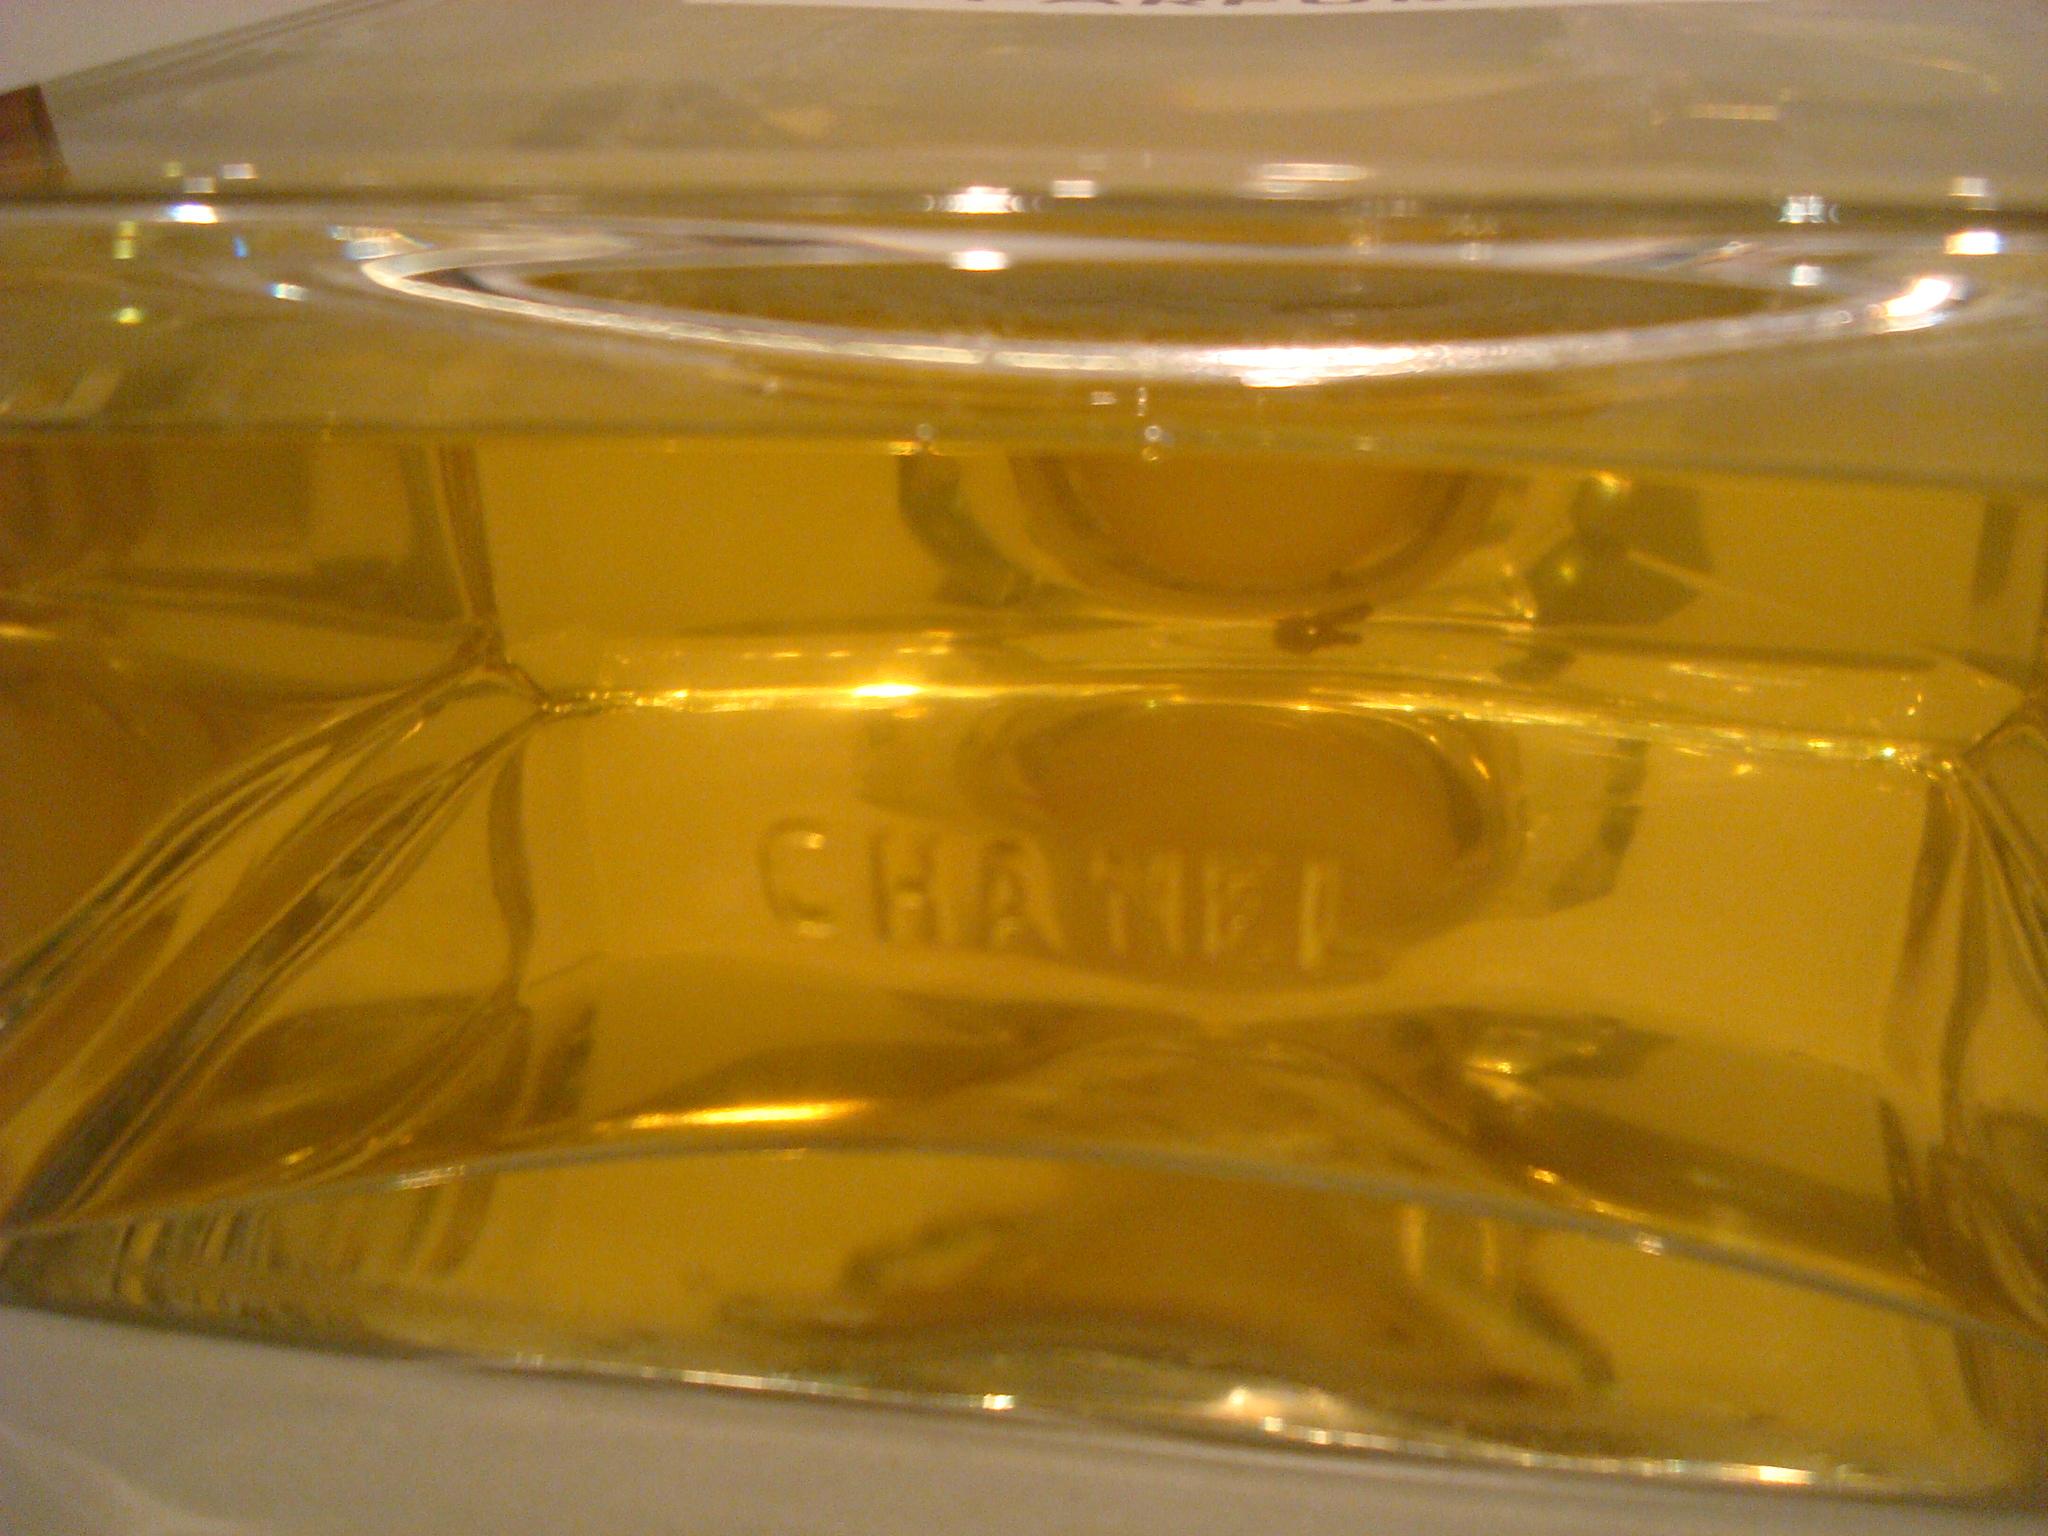 Glass Chanel N5 Huge Store Display Perfume Bottle Advertising, France, 20th Century